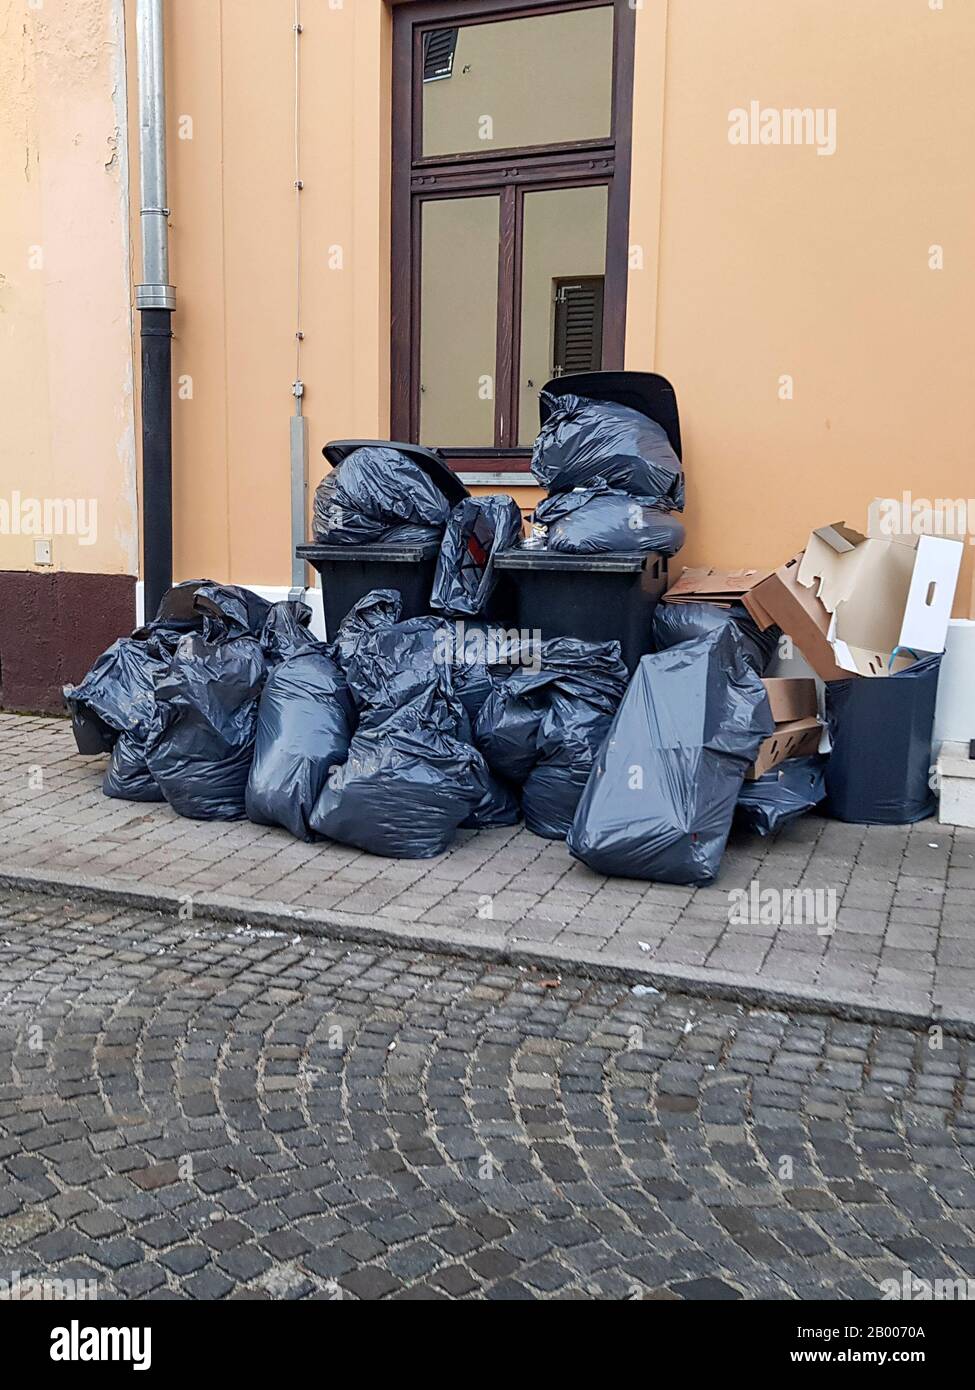 https://c8.alamy.com/comp/2B0070A/a-pile-of-sorted-garbage-on-the-street-there-are-black-bags-bins-and-cardboard-in-the-trash-prepared-for-garbage-collection-2B0070A.jpg